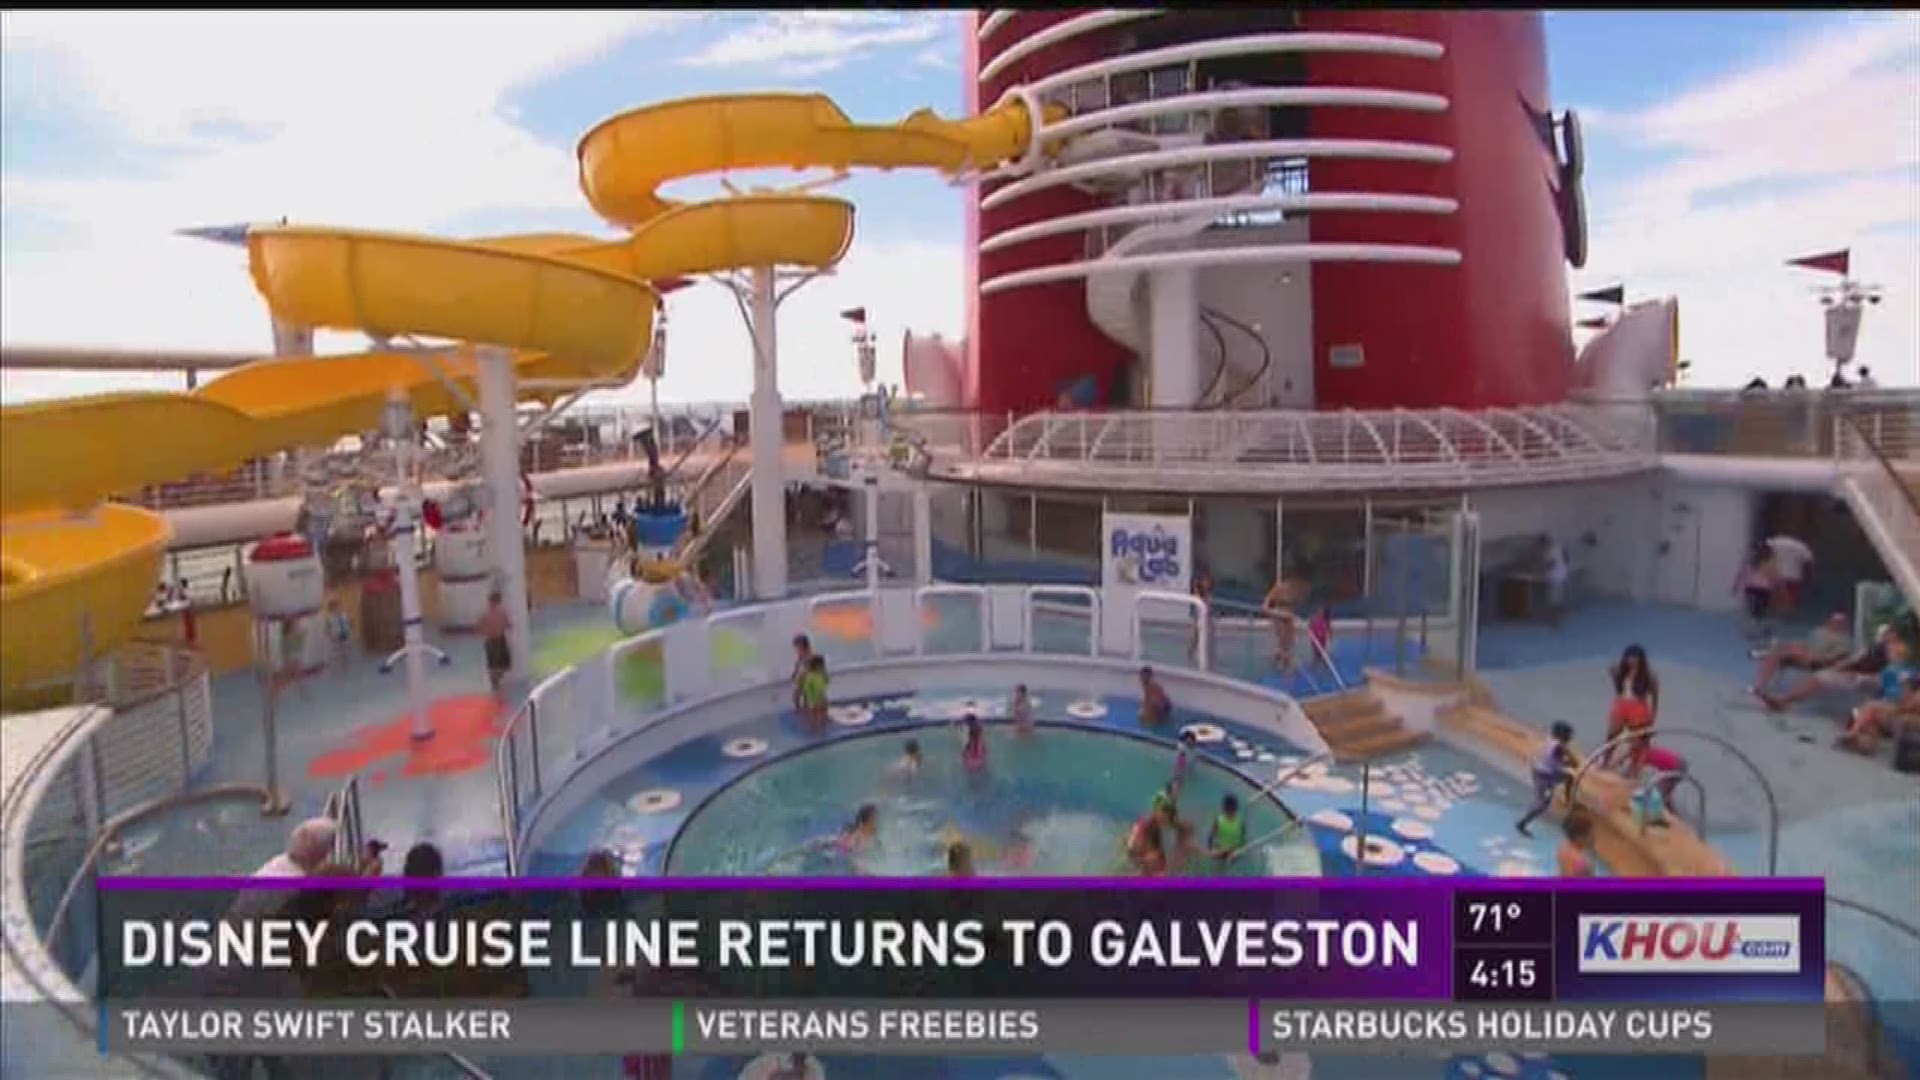 The Disney Wonder is back! KHOU's Lily Jang takes a tour of the ship and shows viewers what the vessel has to offer.